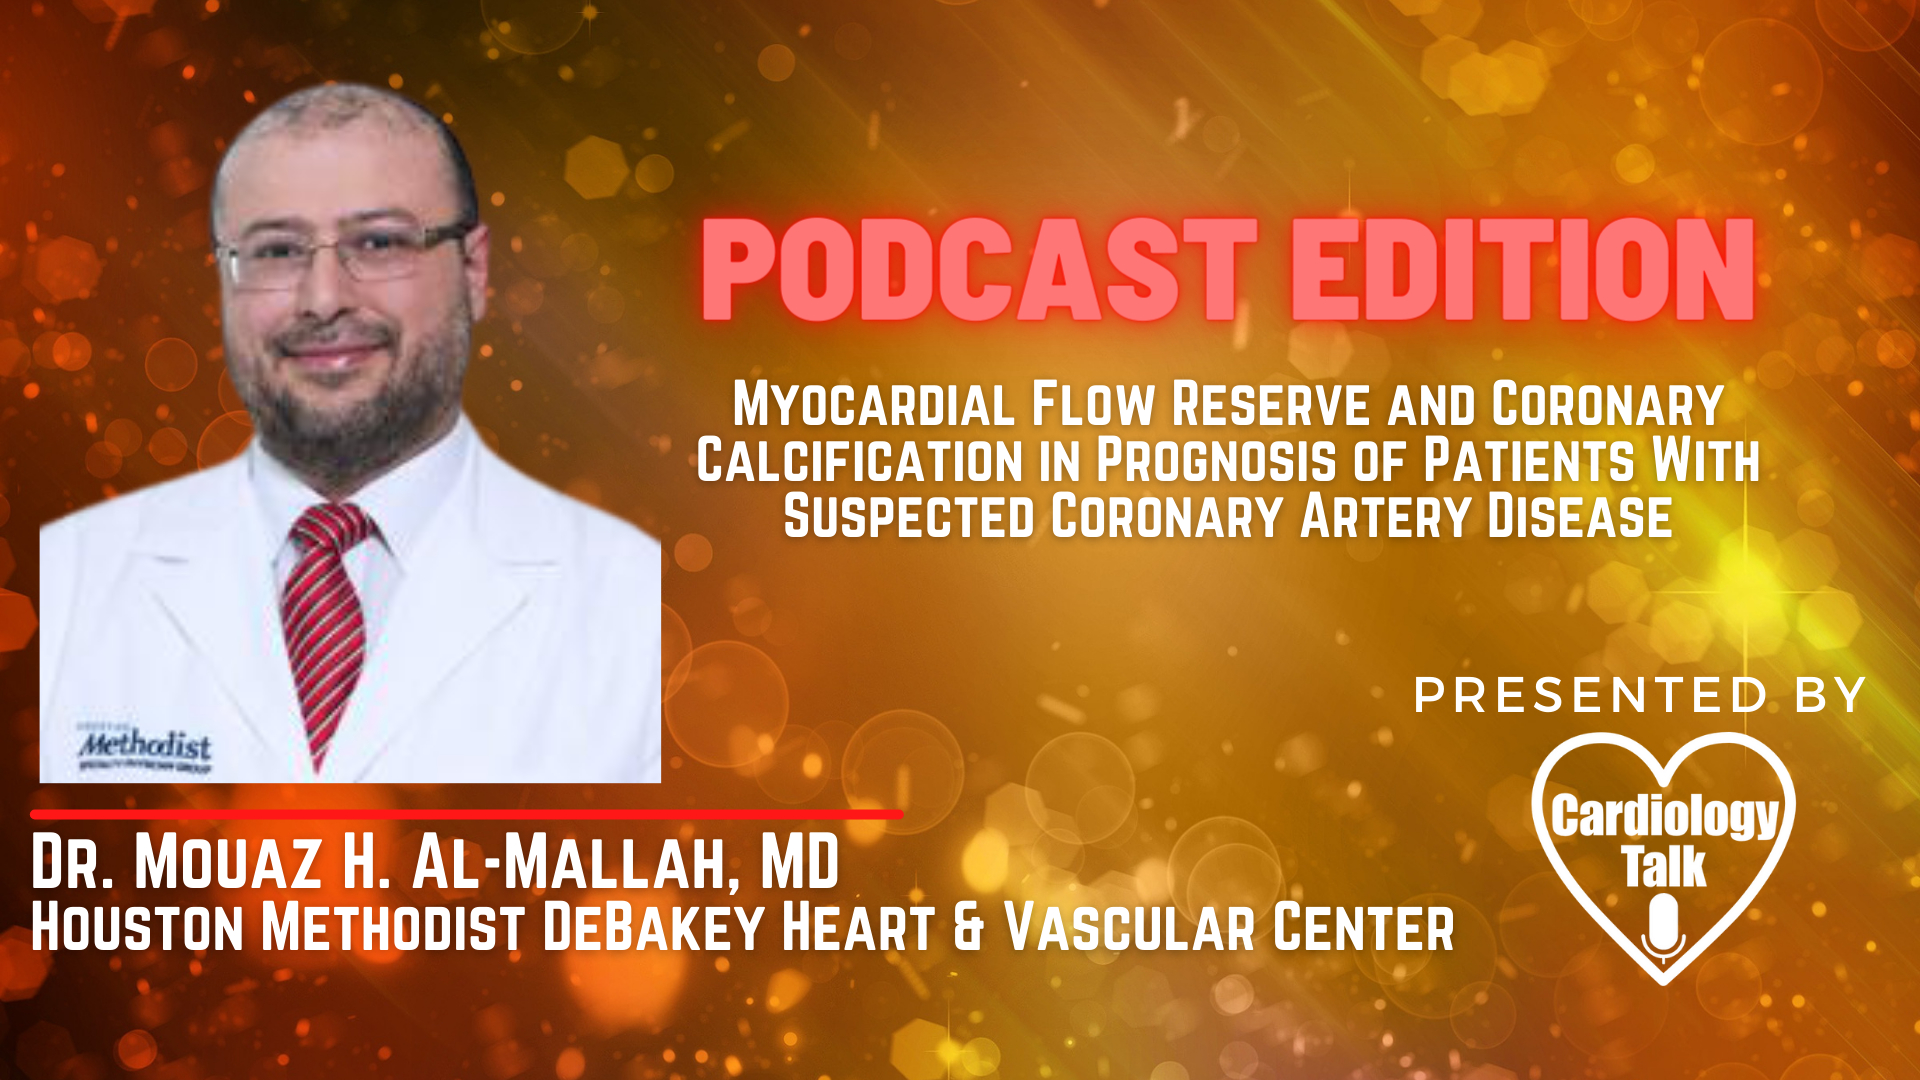 Podcast- Dr. Mouaz H. Al-Mallah, MD-Myocardial Flow Reserve and Coronary Calcification in Prognosis of Patients With Suspected Coronary Artery Disease